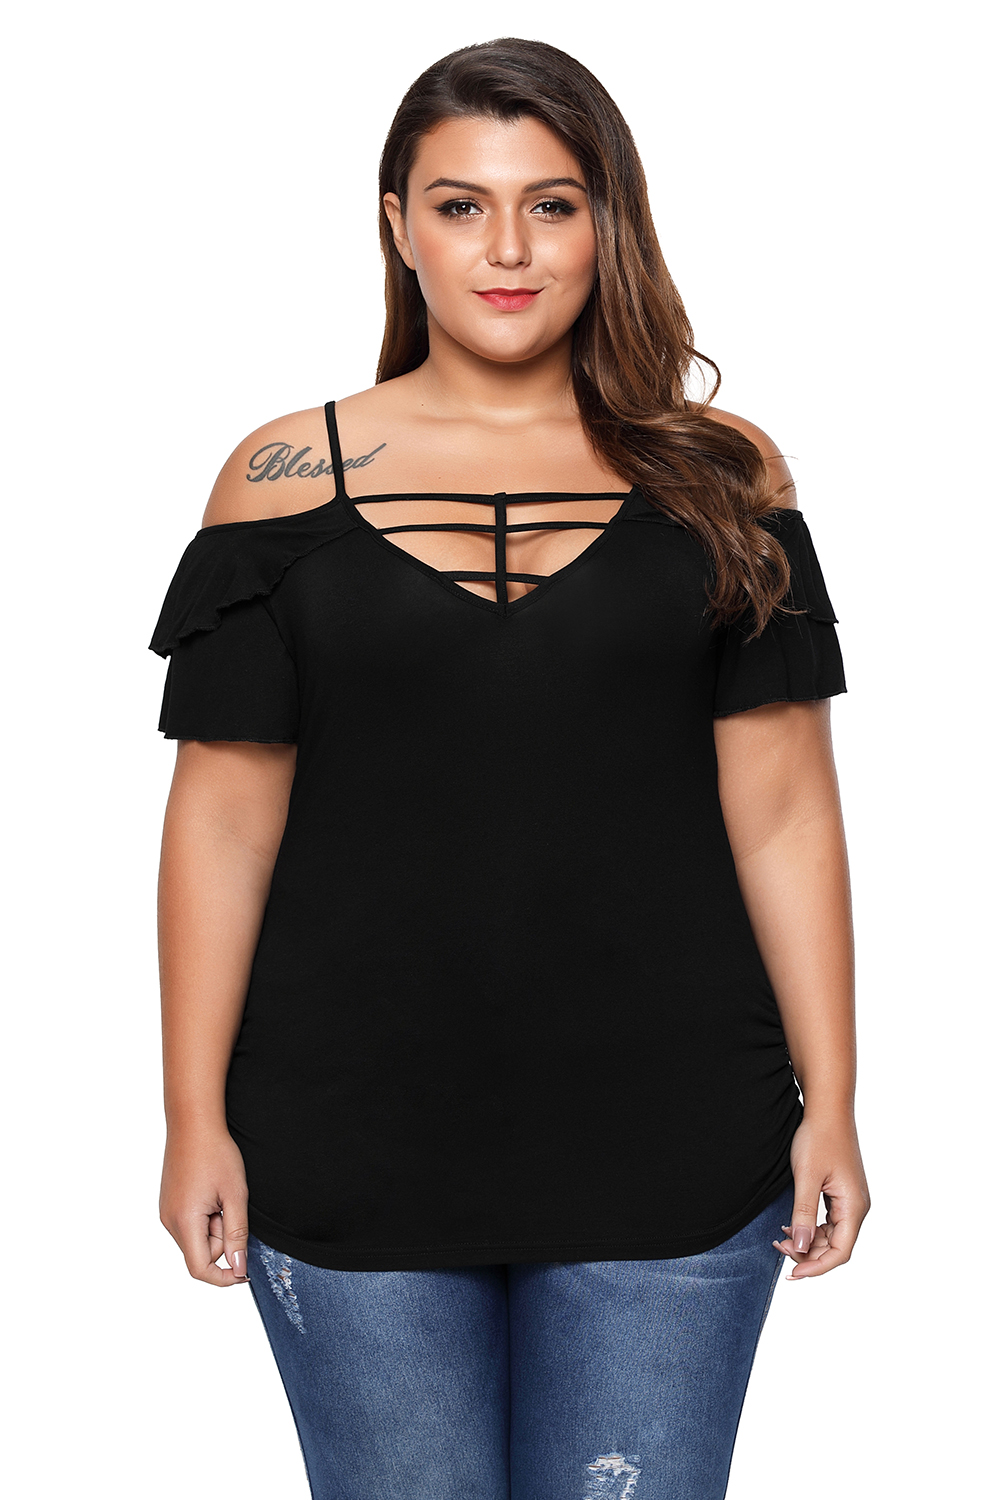 Babydoll Tops Plus Size